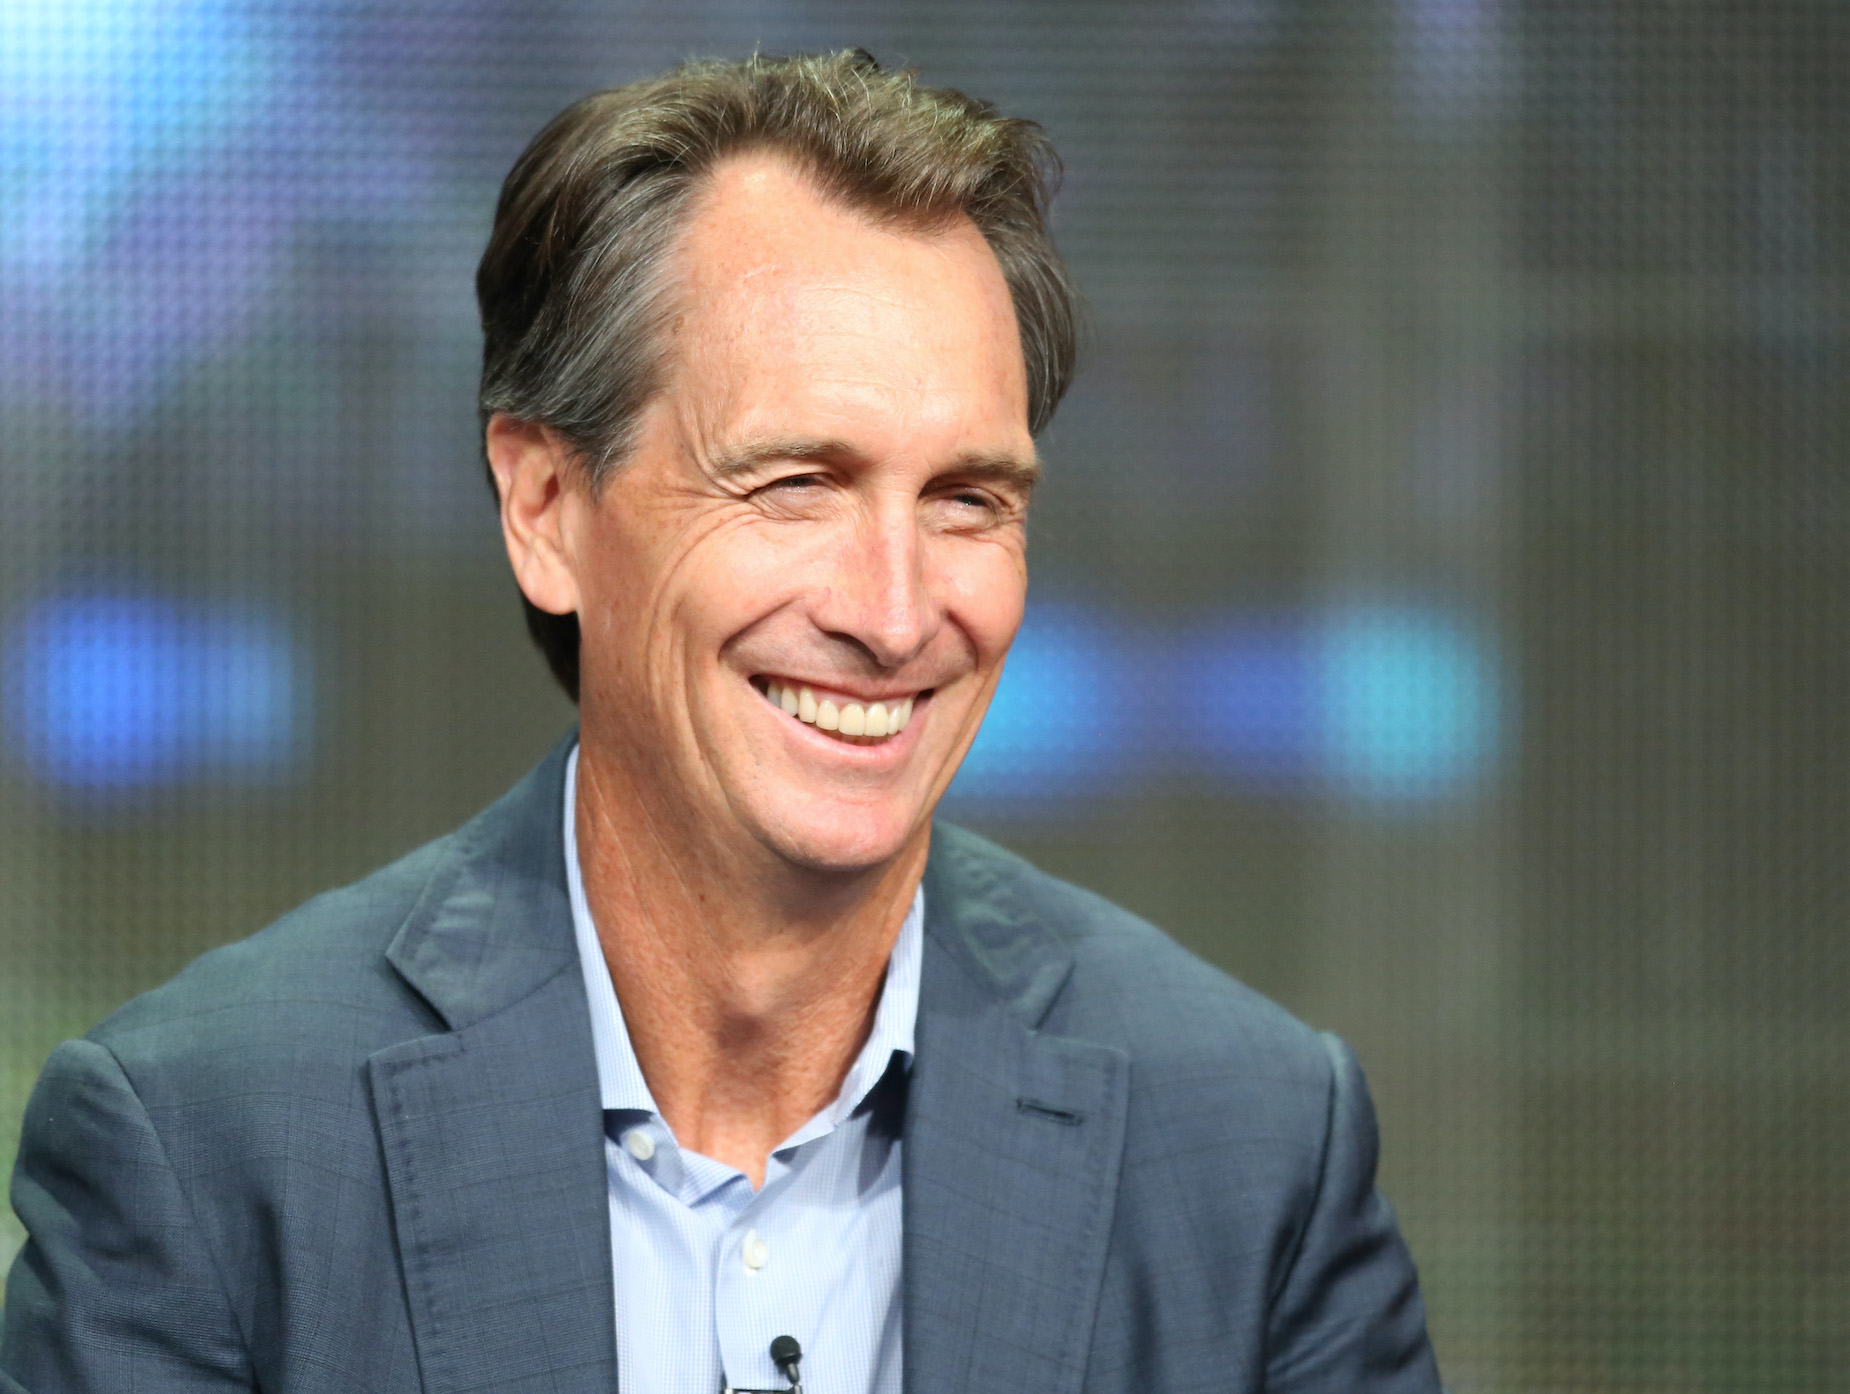 Cris Collinsworth may have finally found a fanbase that doesn't completely hate him.